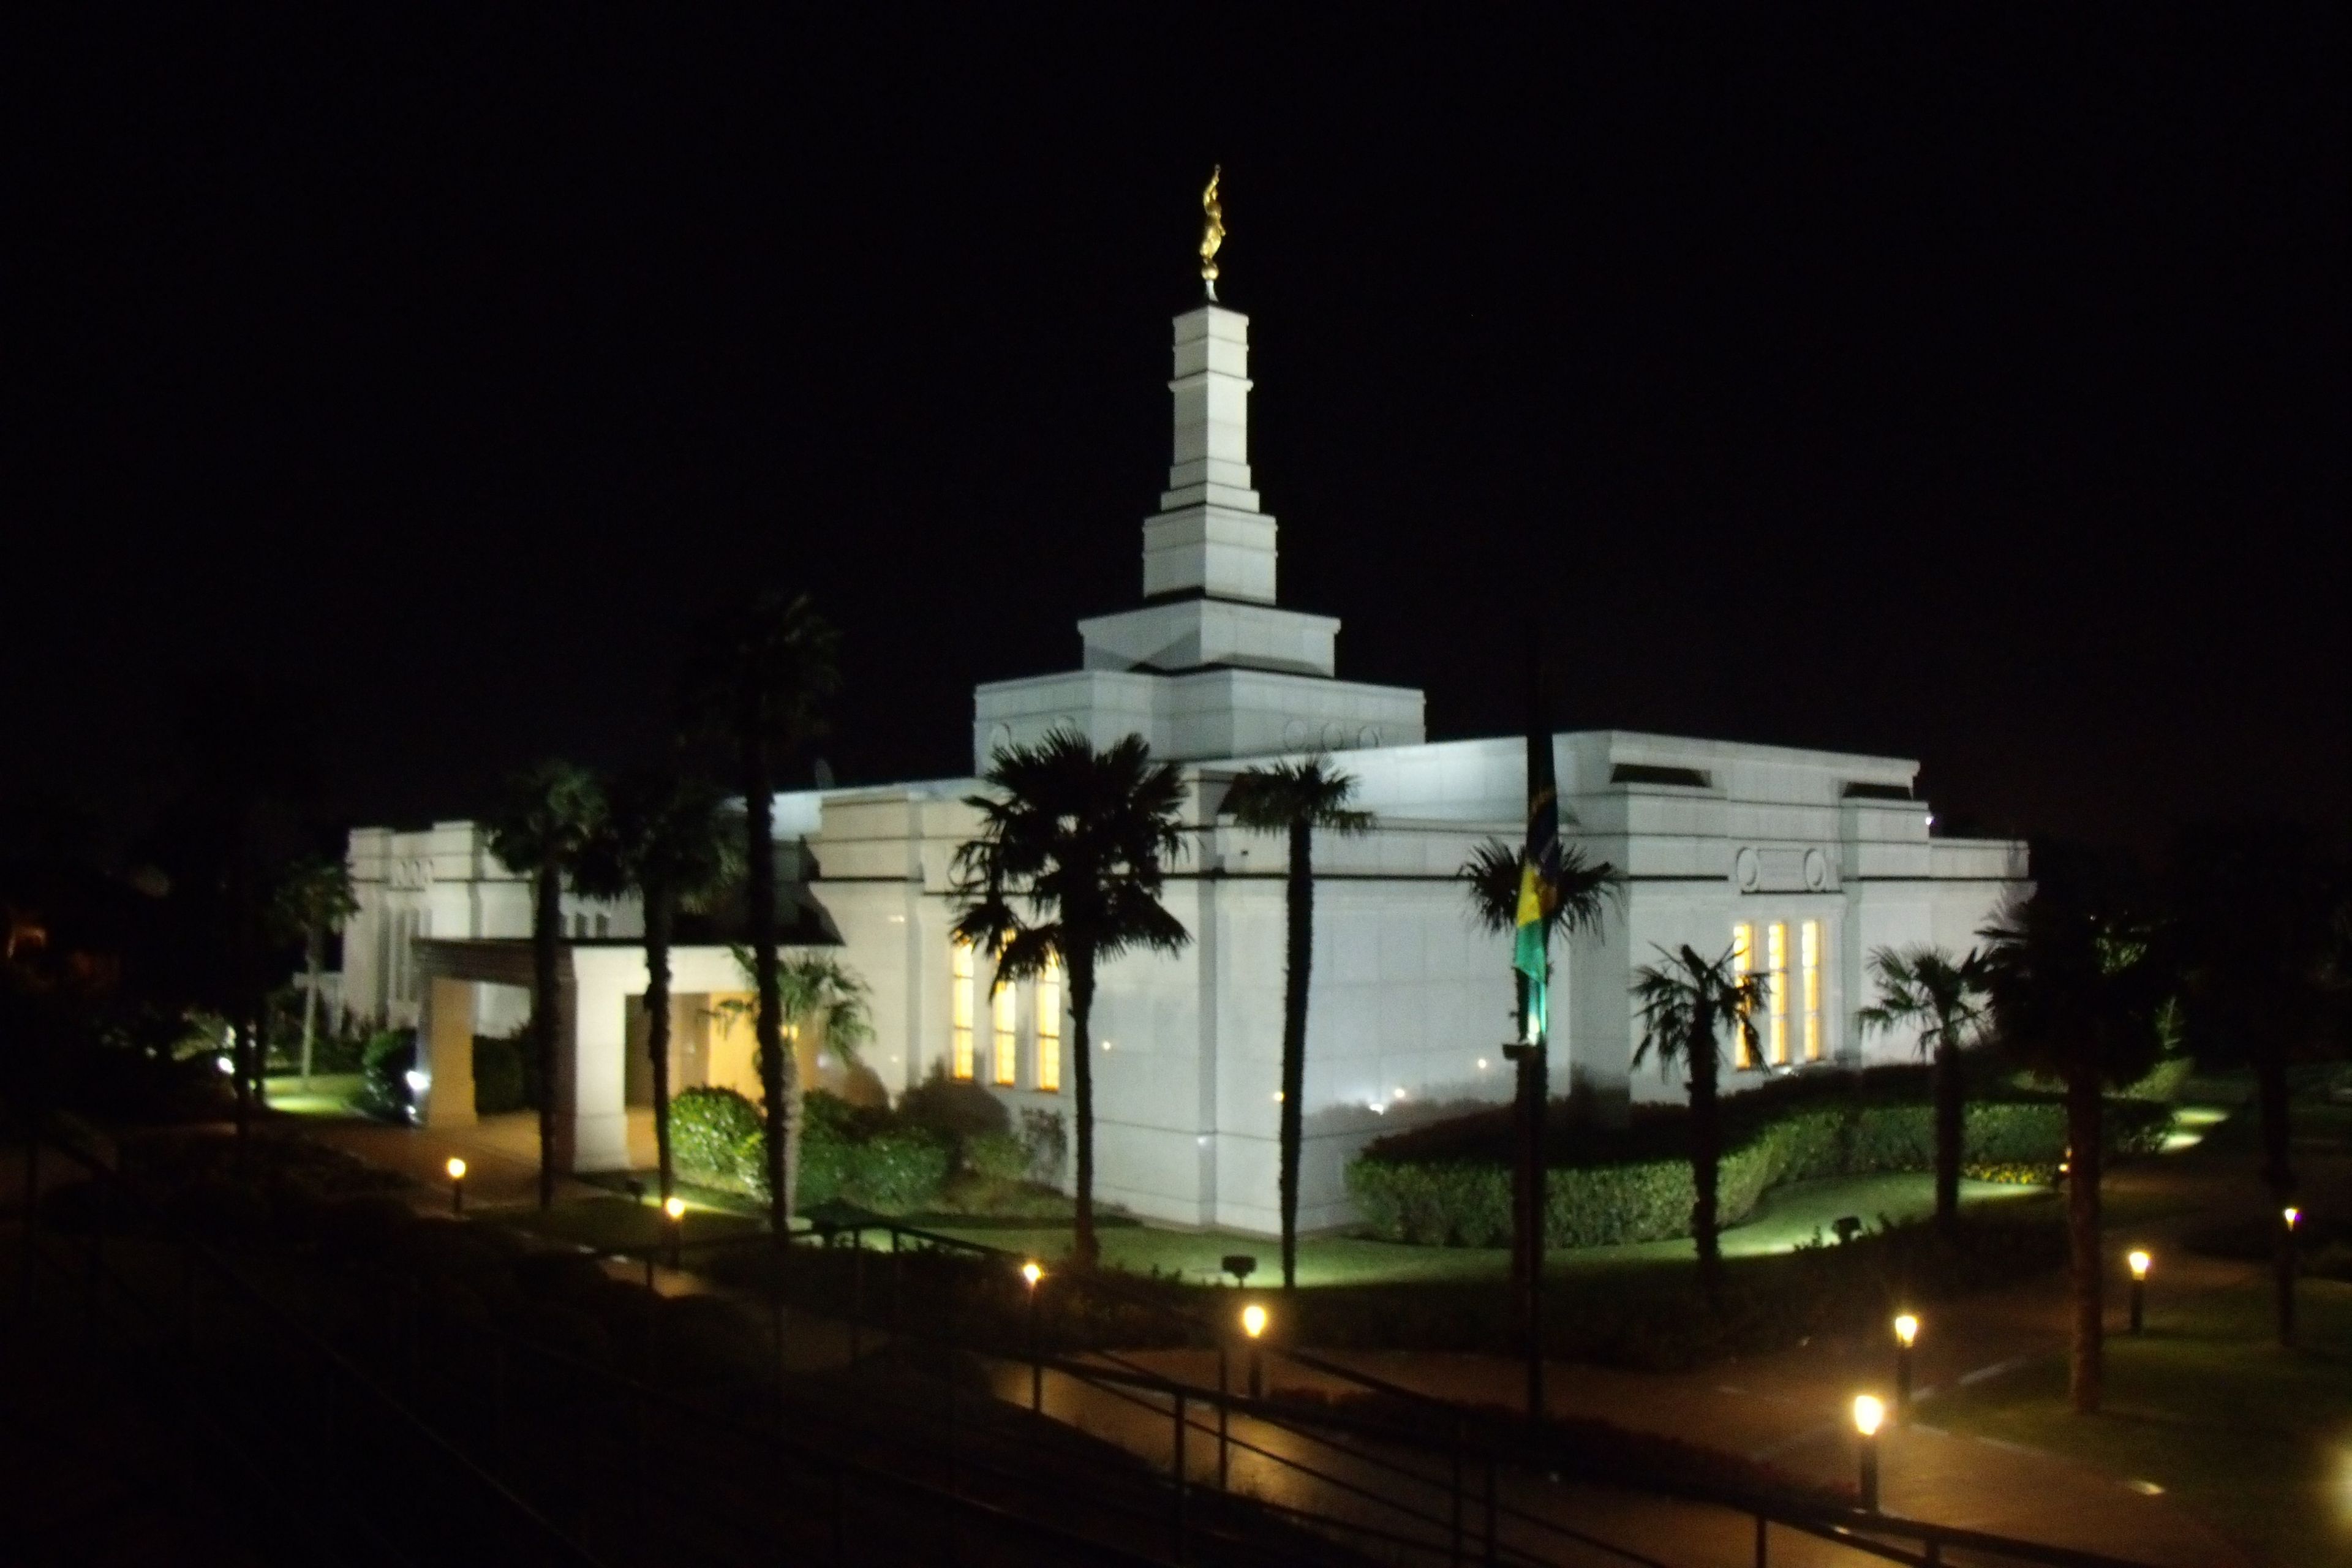 The Porto Alegre Brazil Temple in the evening, including the entrance and scenery.